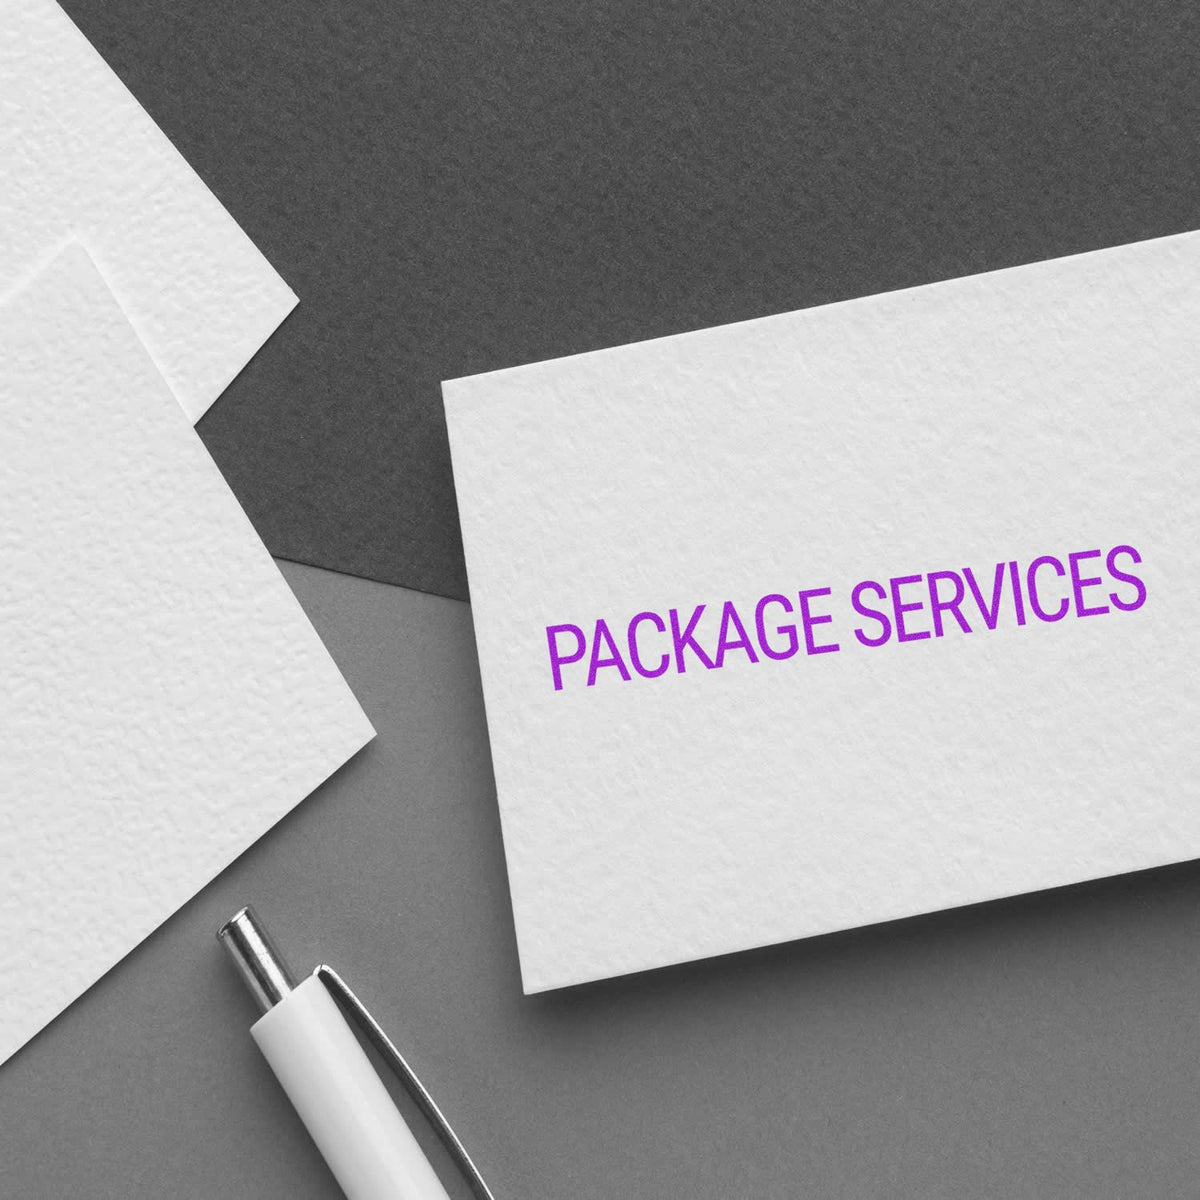 Slim Pre-Inked Package Services Stamp In Use